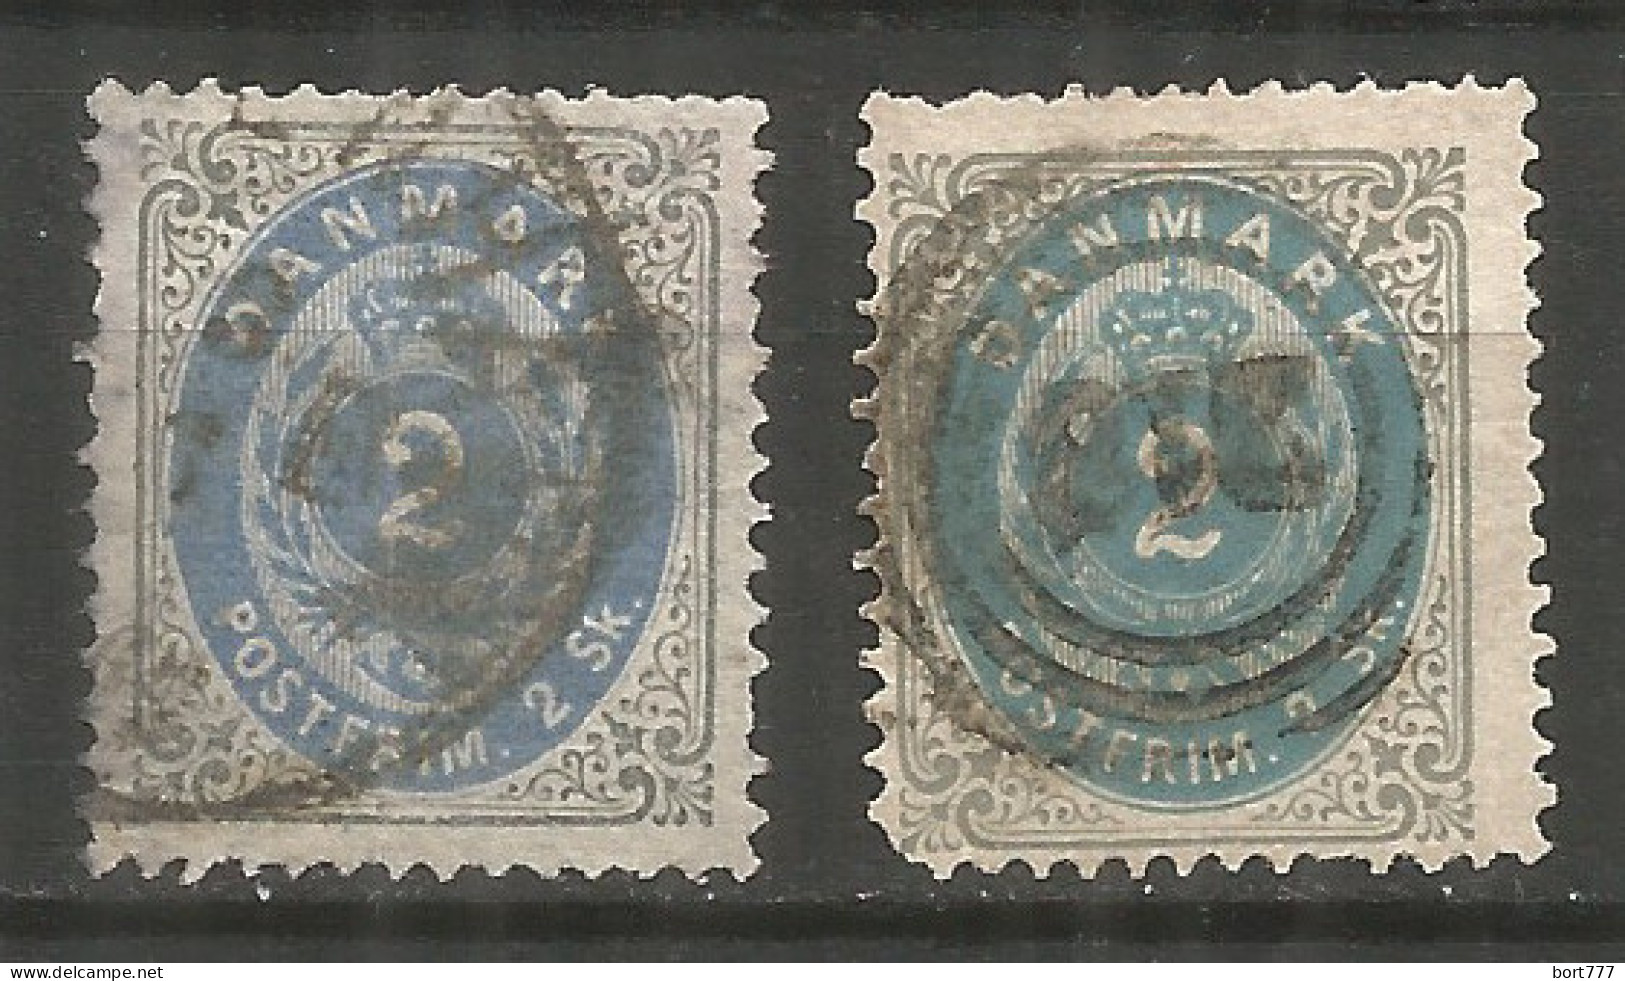 Denmark 1870 Year Used Stamps Mi. 16 I, II - Used Stamps